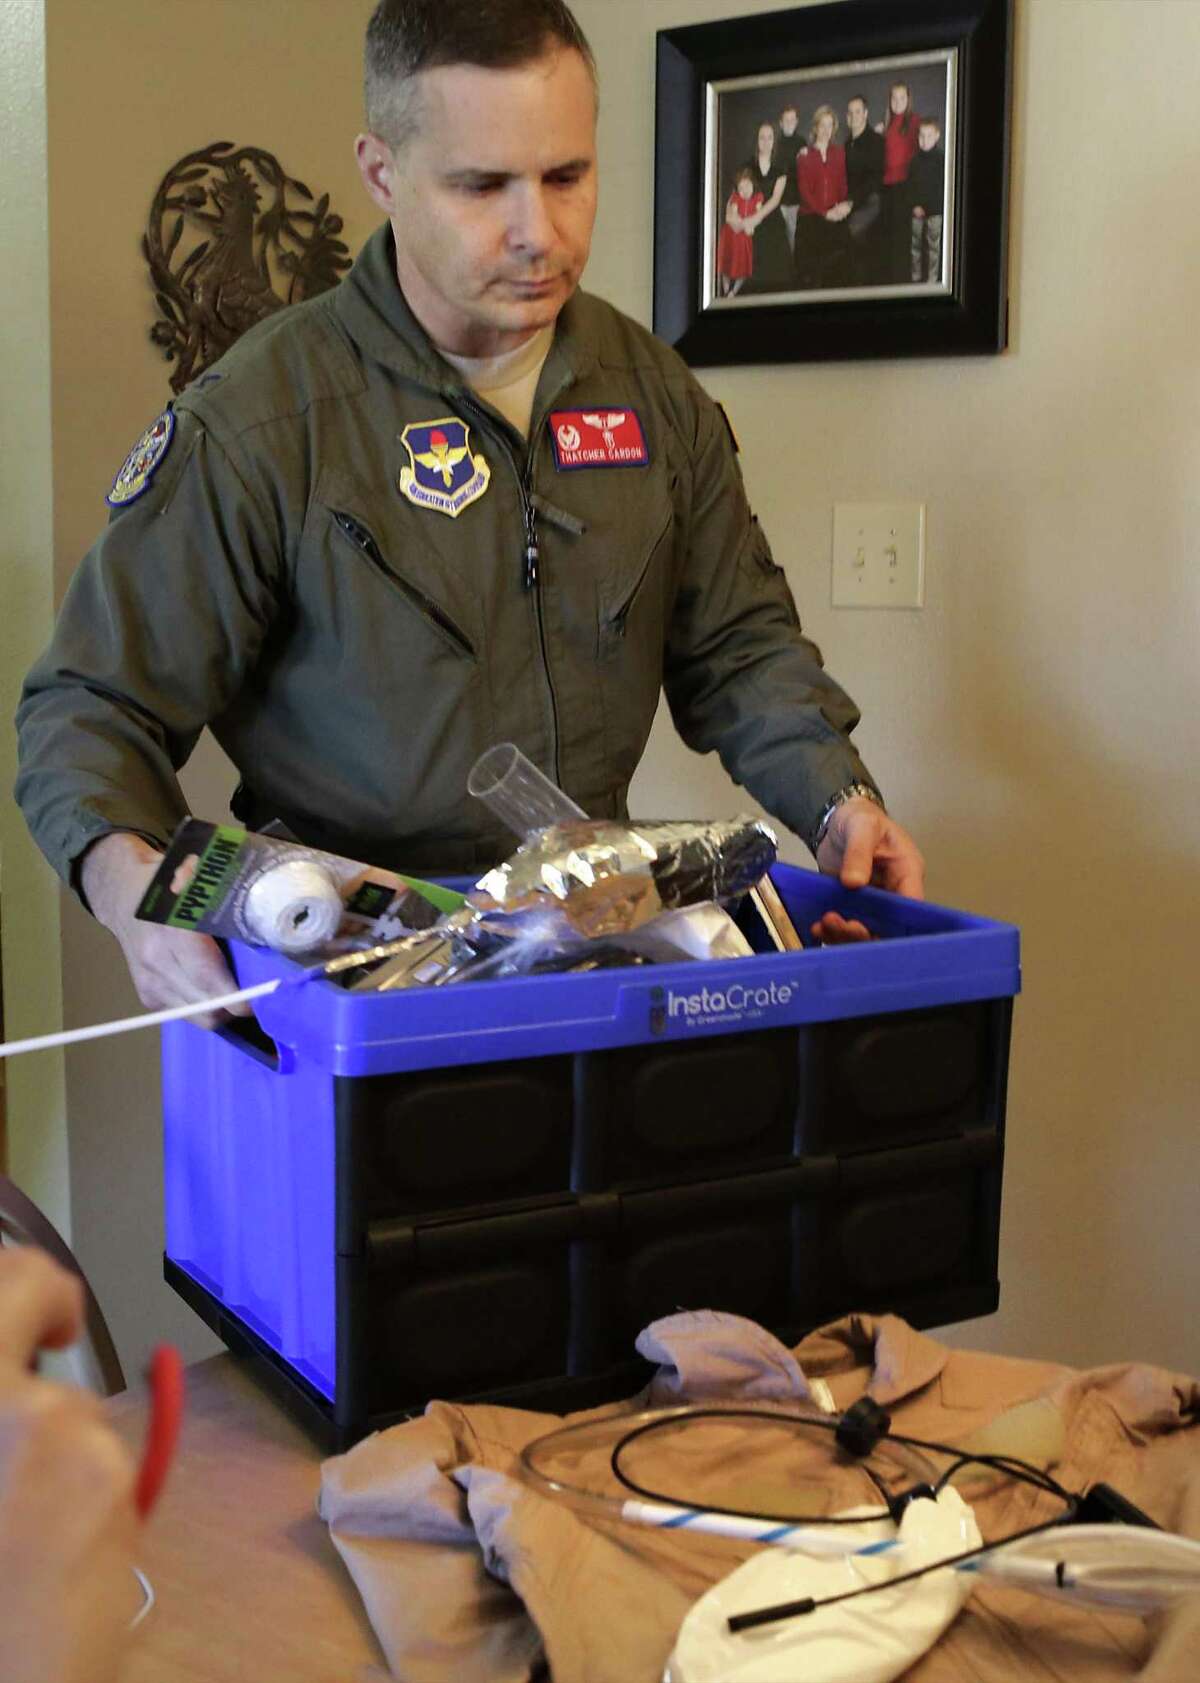 Col. Dr. Thatcher Cardon carries a box of everyday supplies he bought at dollar and hardware stores to create his MACES Perineal Access & Toileting System.